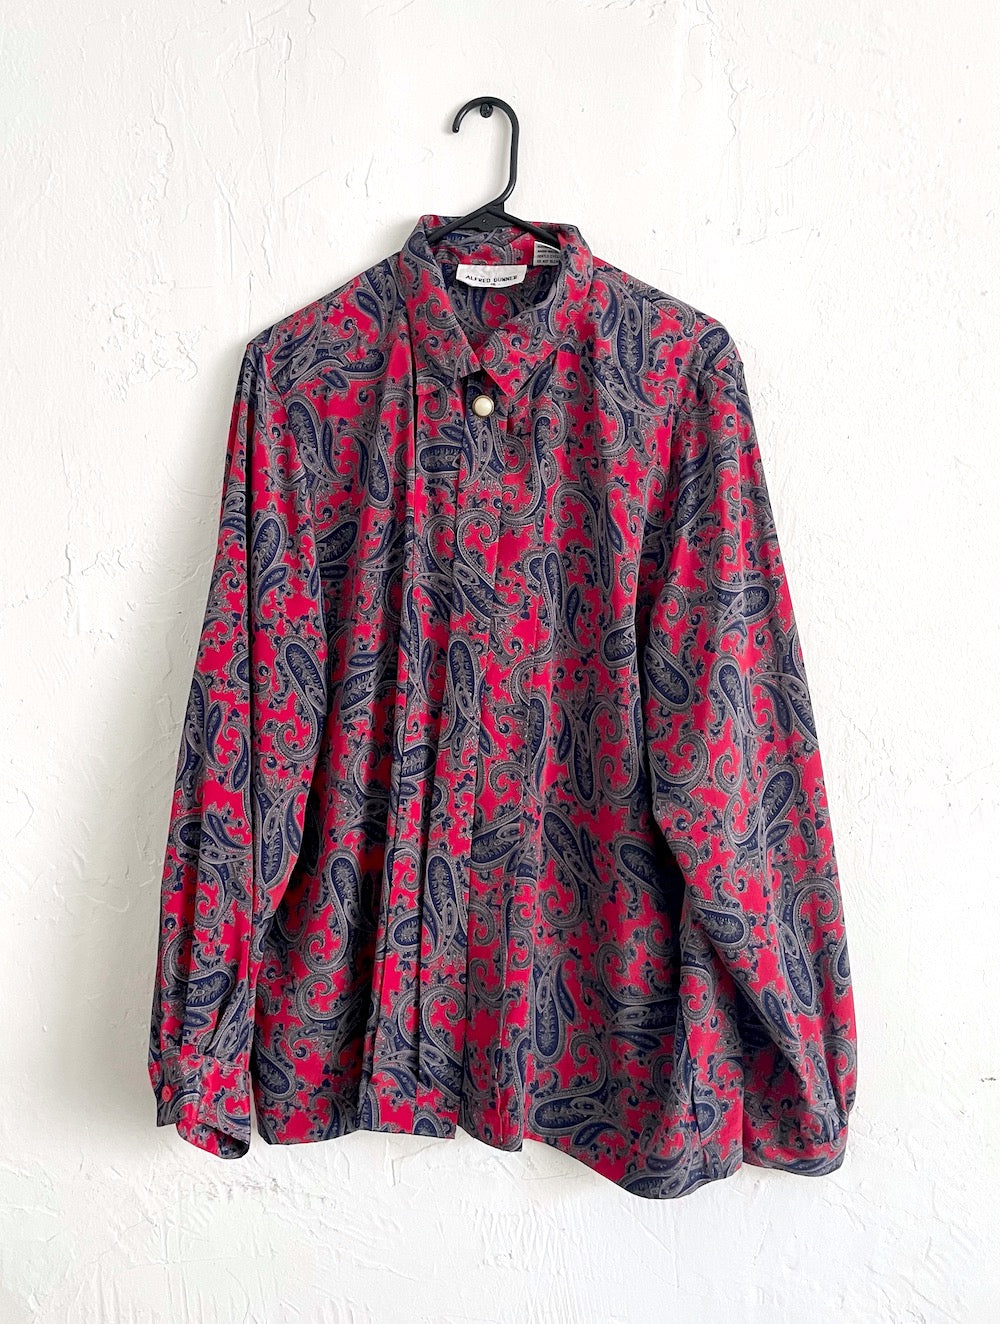 Vintage 80s Silky Red and Blue Paisley Print Faux Pearl Button Down Blouse